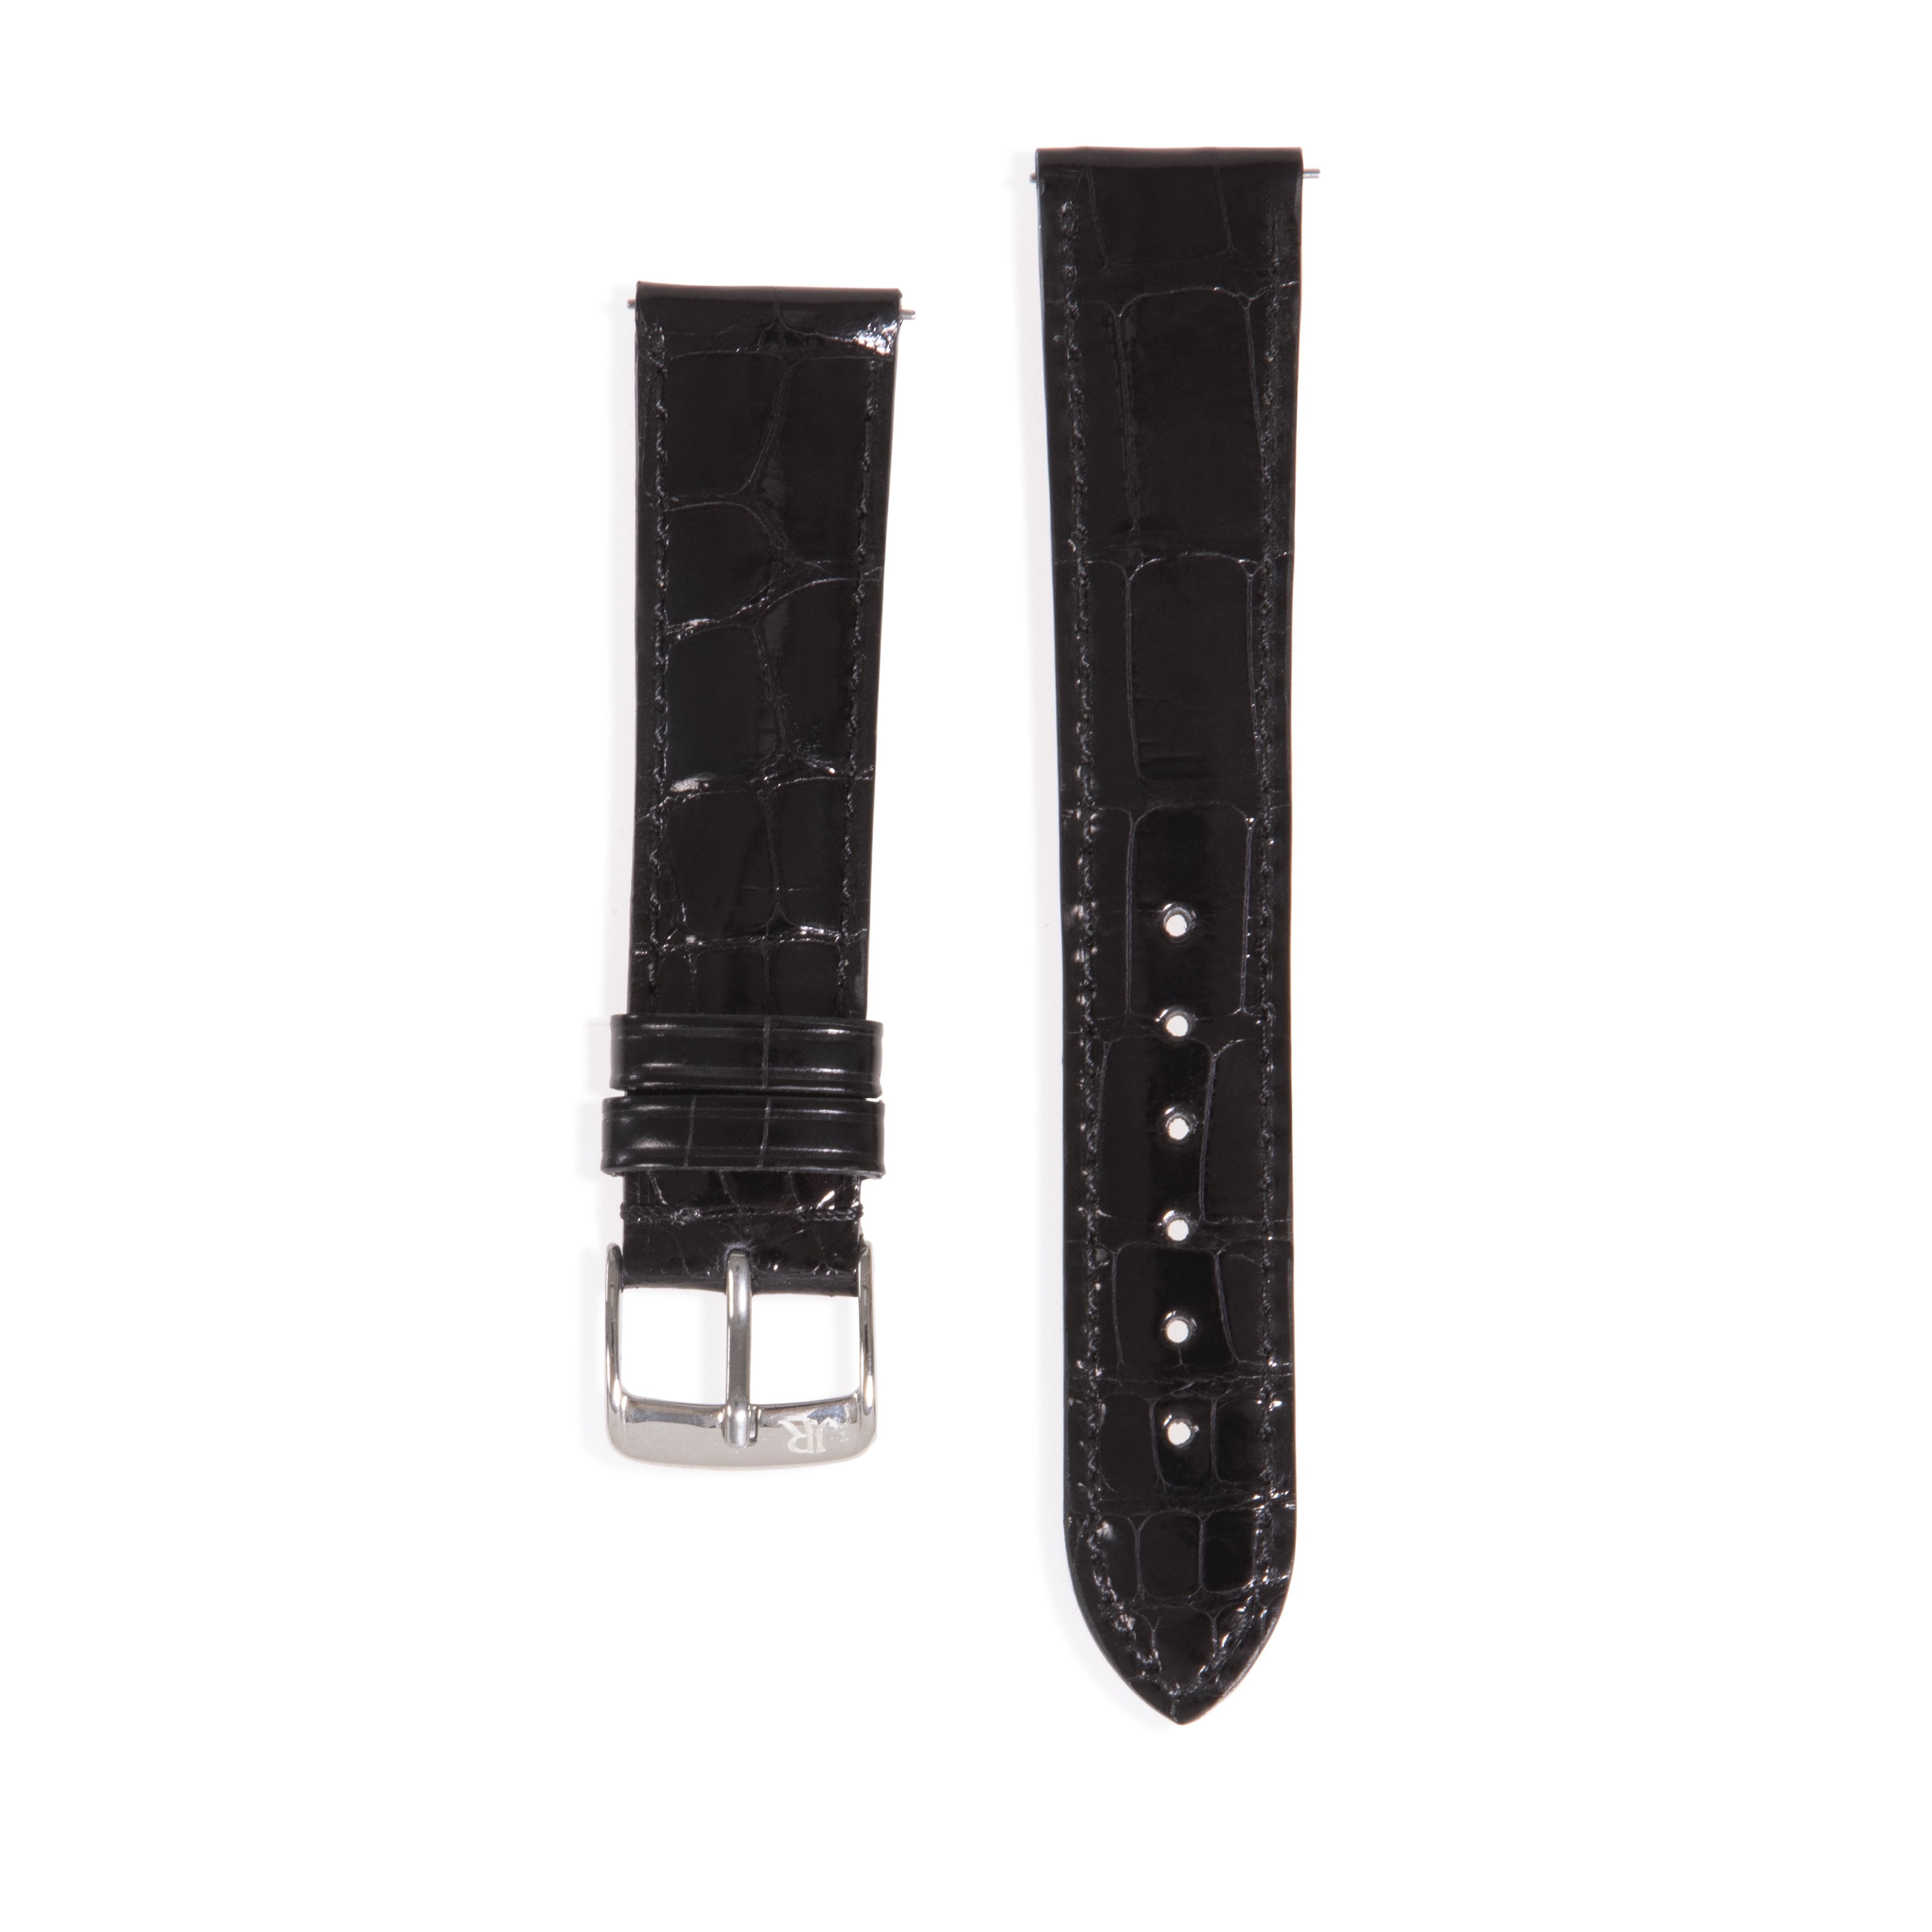 Metal and real alligator watch strap: Which one is best for you?